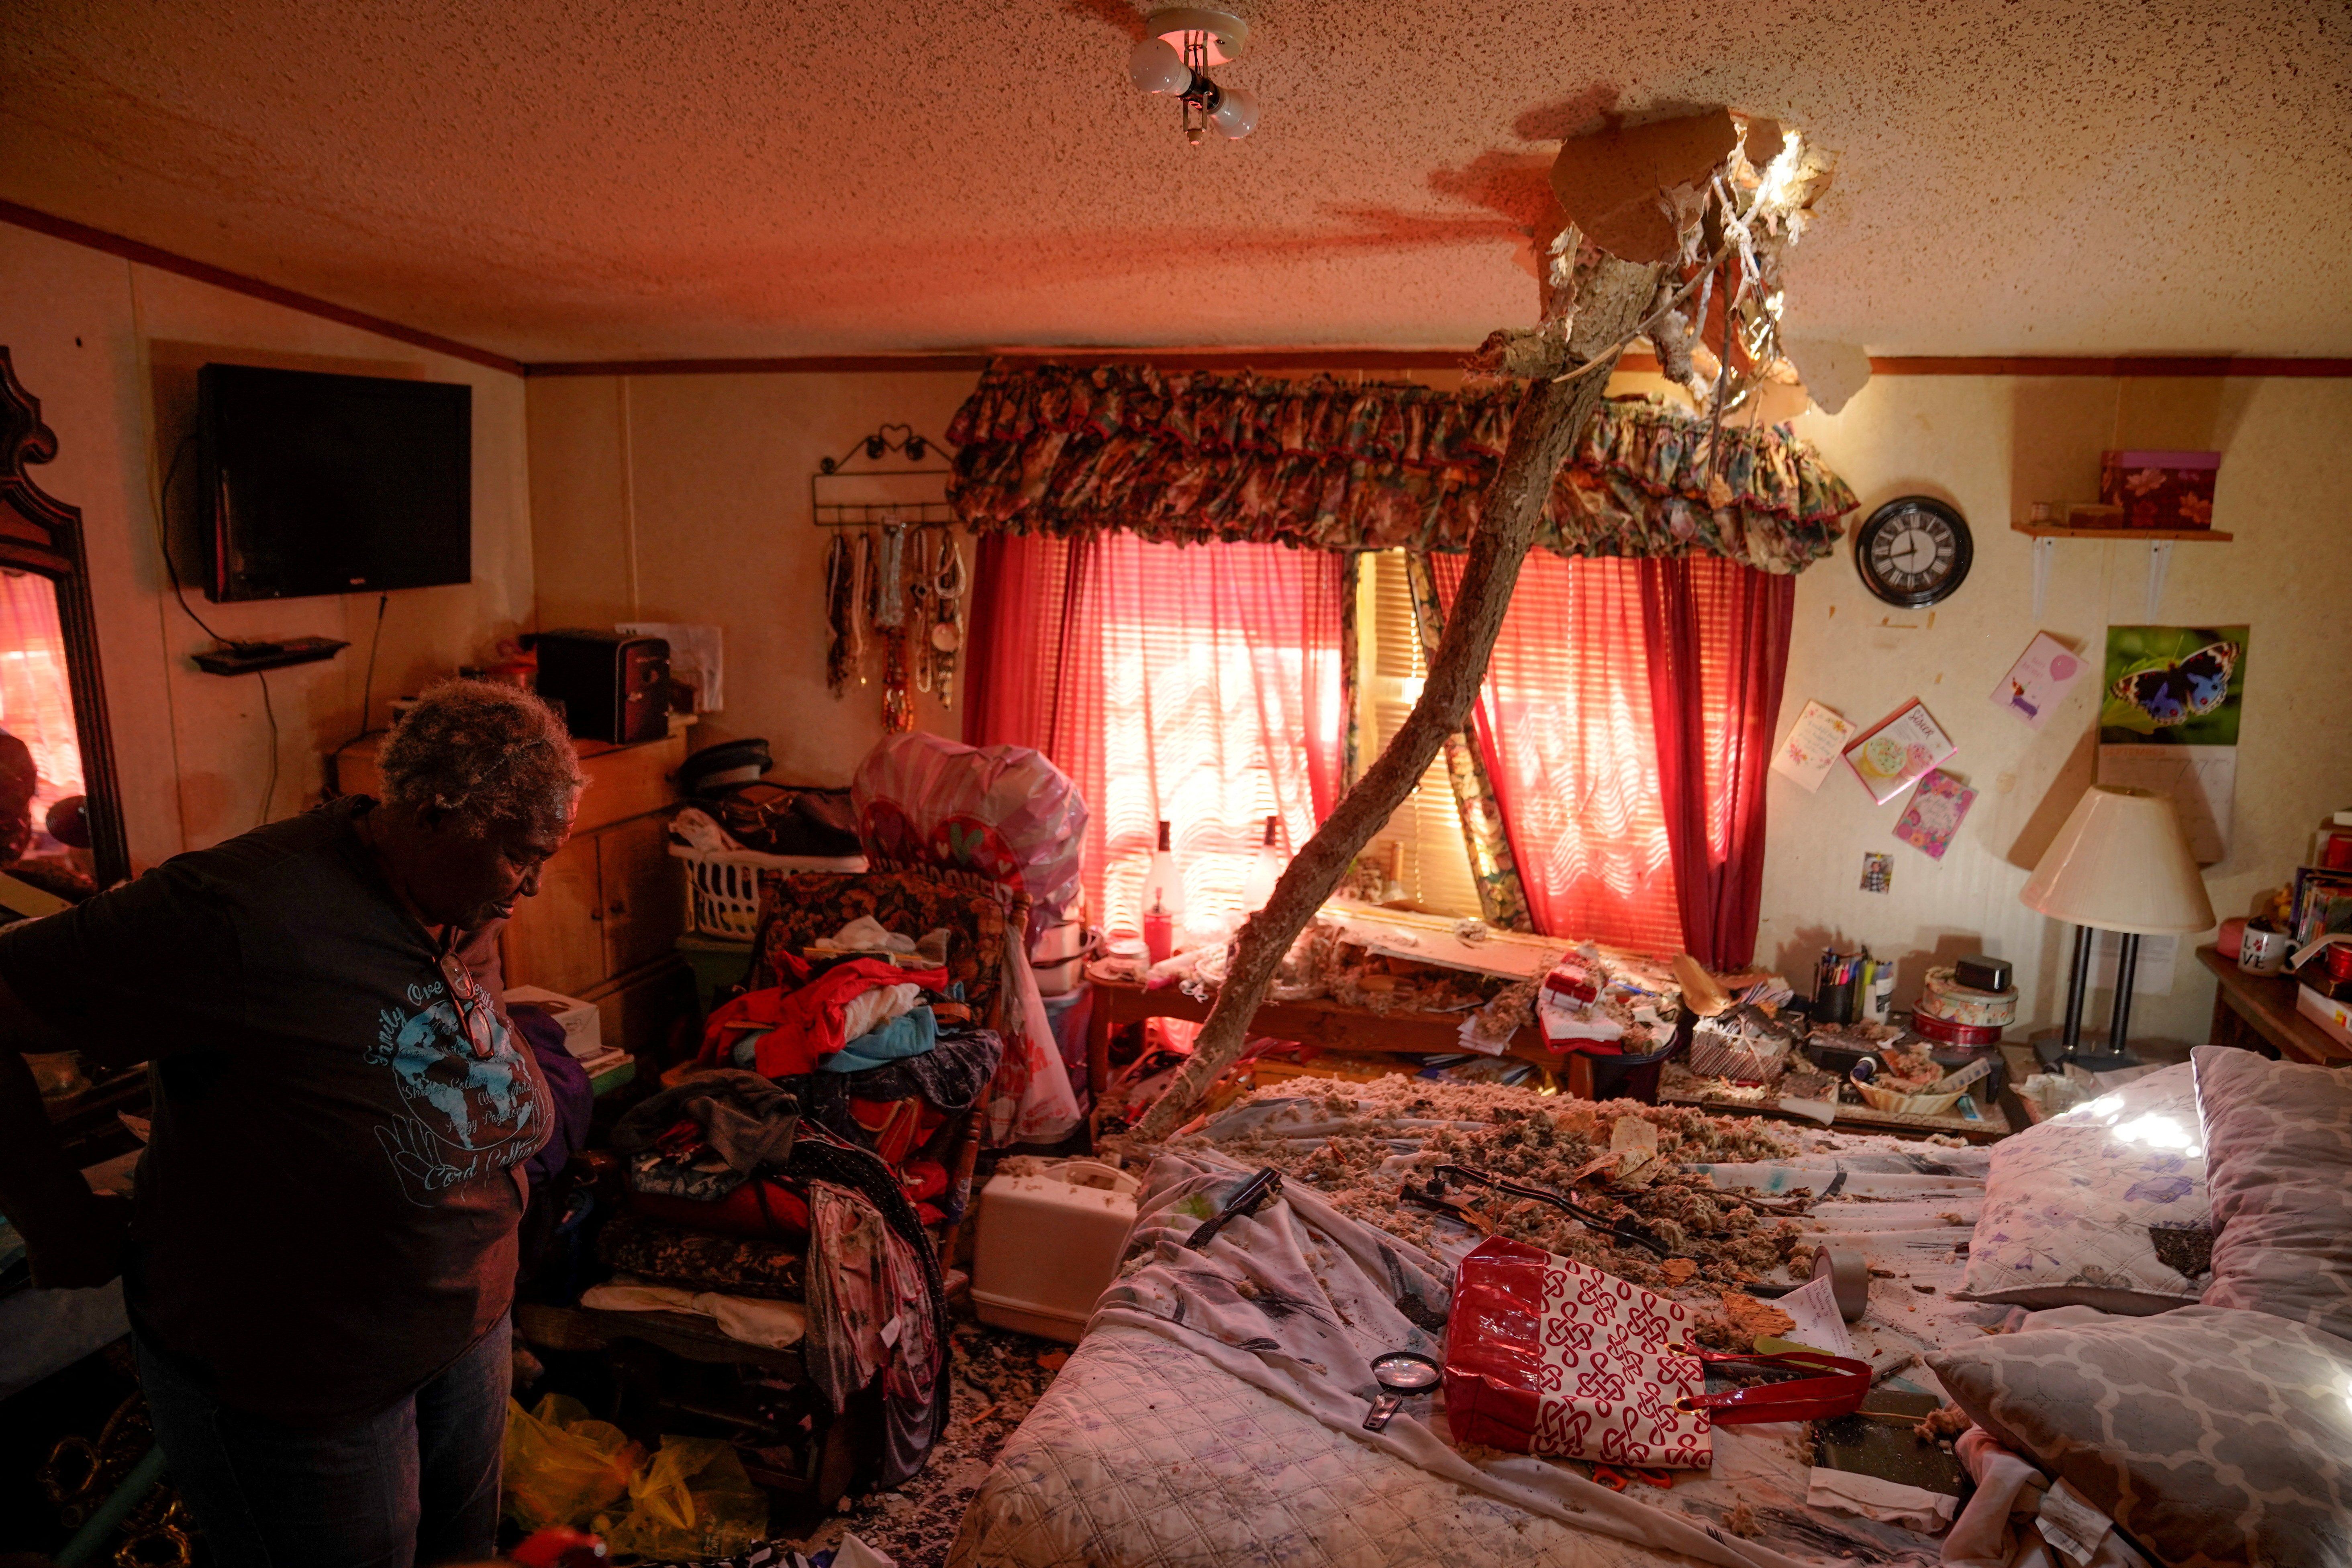 The aftermath of a tornado, in Wynne, Arkansas: A tree branch is seen impaled through the ceiling of a family home. 